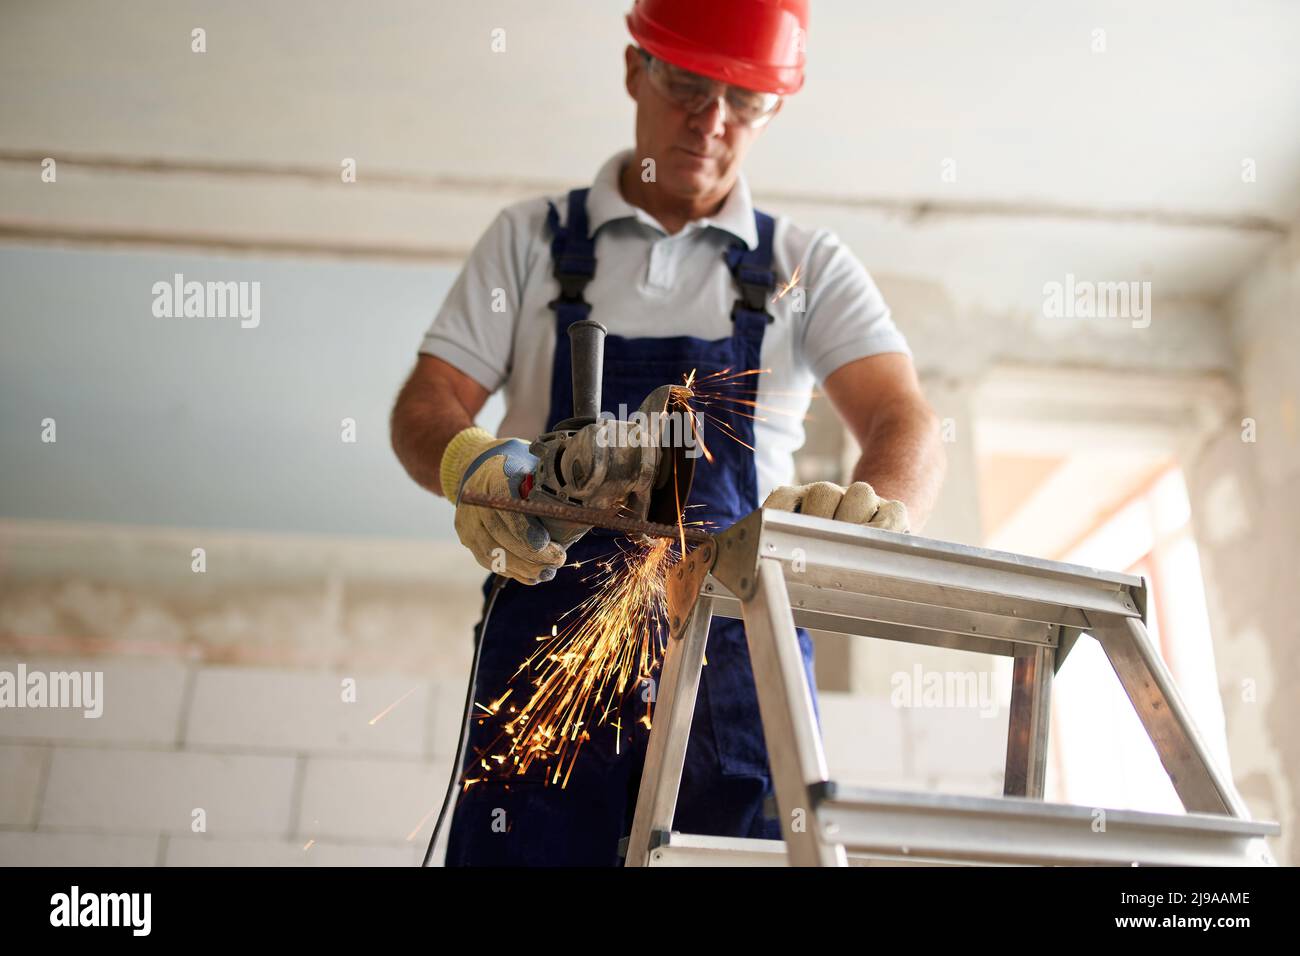 Professional construction worker hands in work gloves using angle grinder to cut metal rod at building site. Close up shot of contractor cutting iron Stock Photo